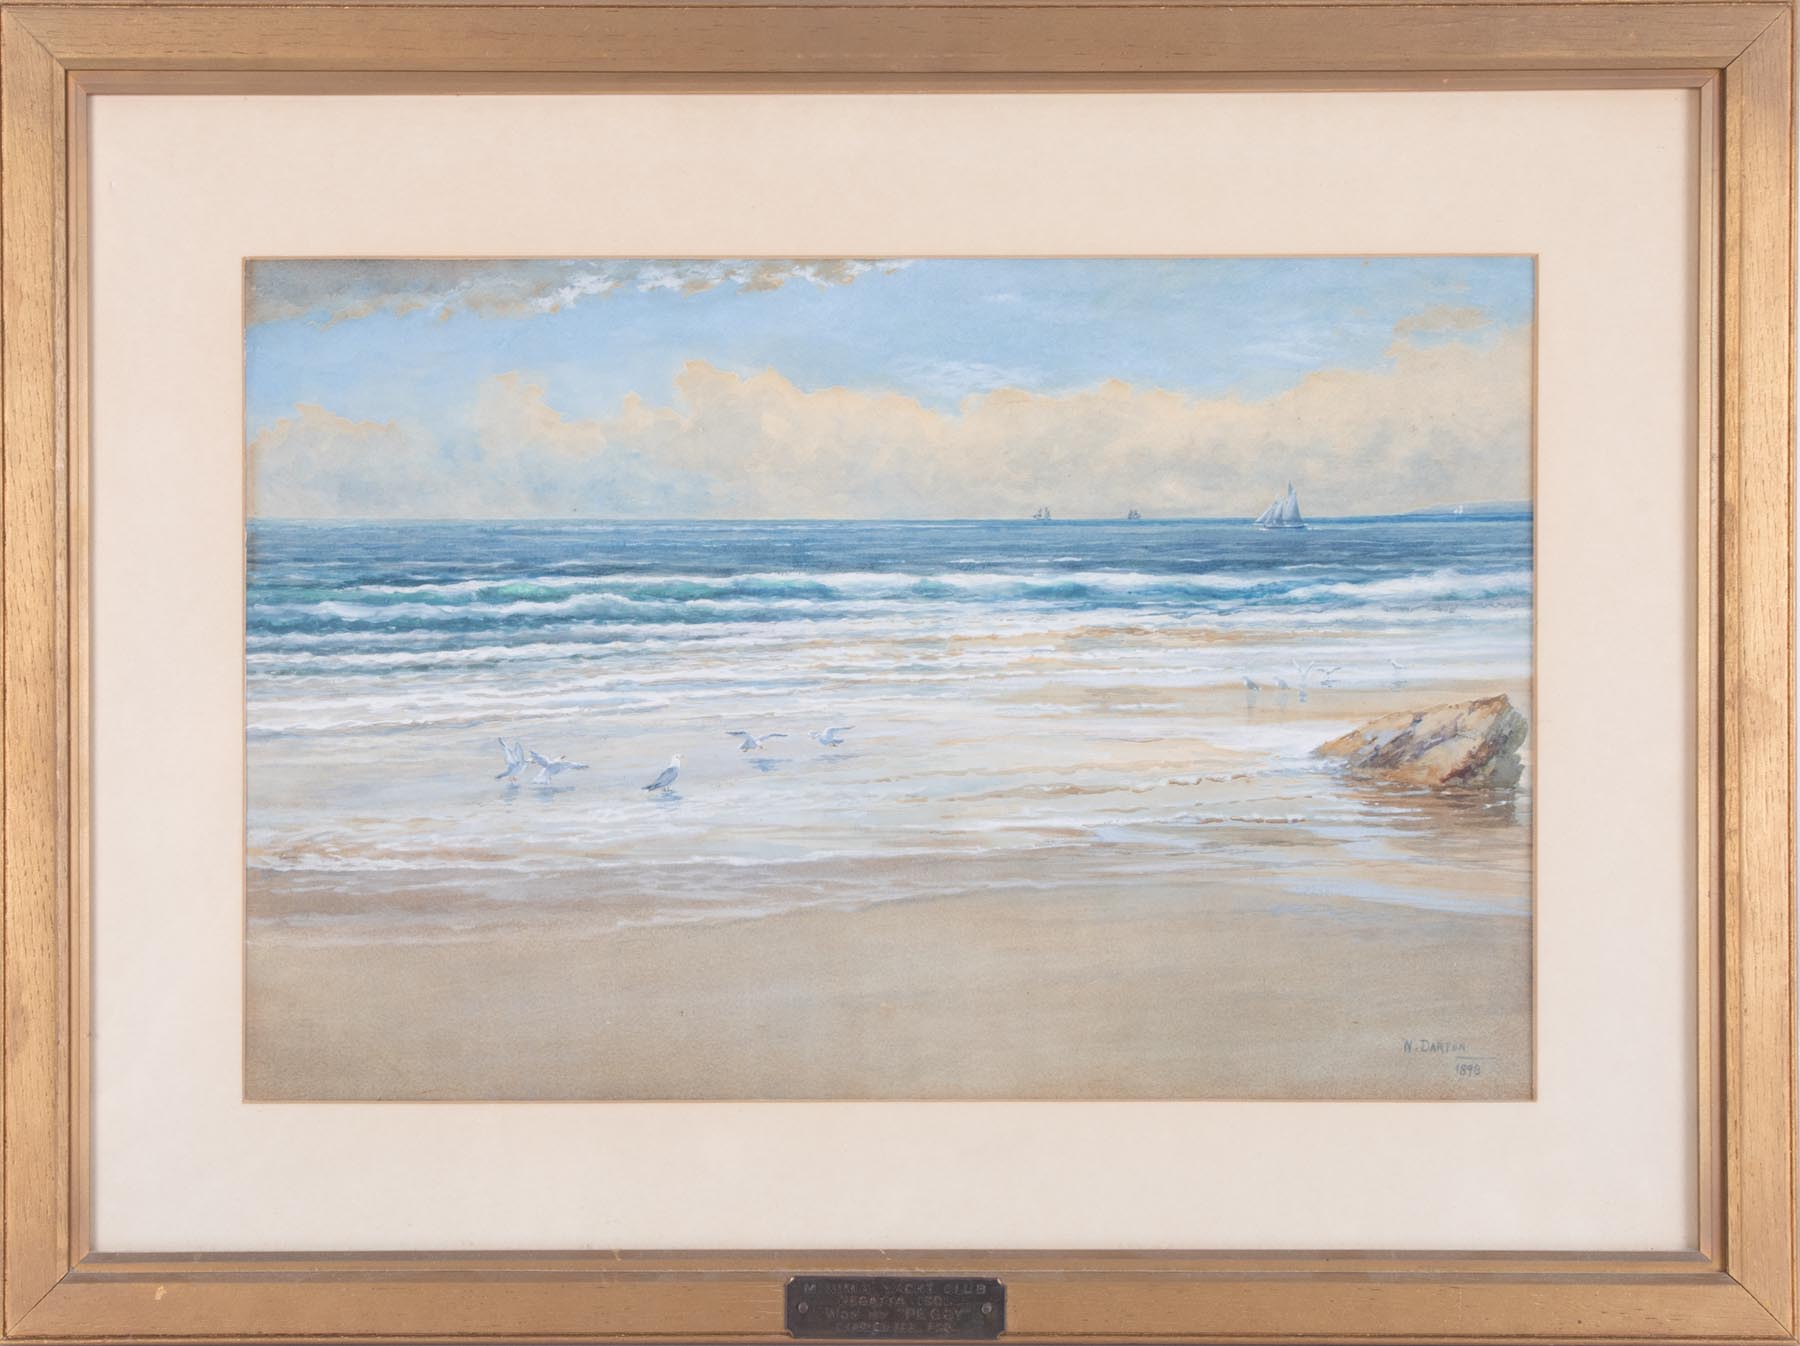 W.Darton, watercolour 'Seascape' signed and dated 1898, 29cm x 45cm, framed and glazed.